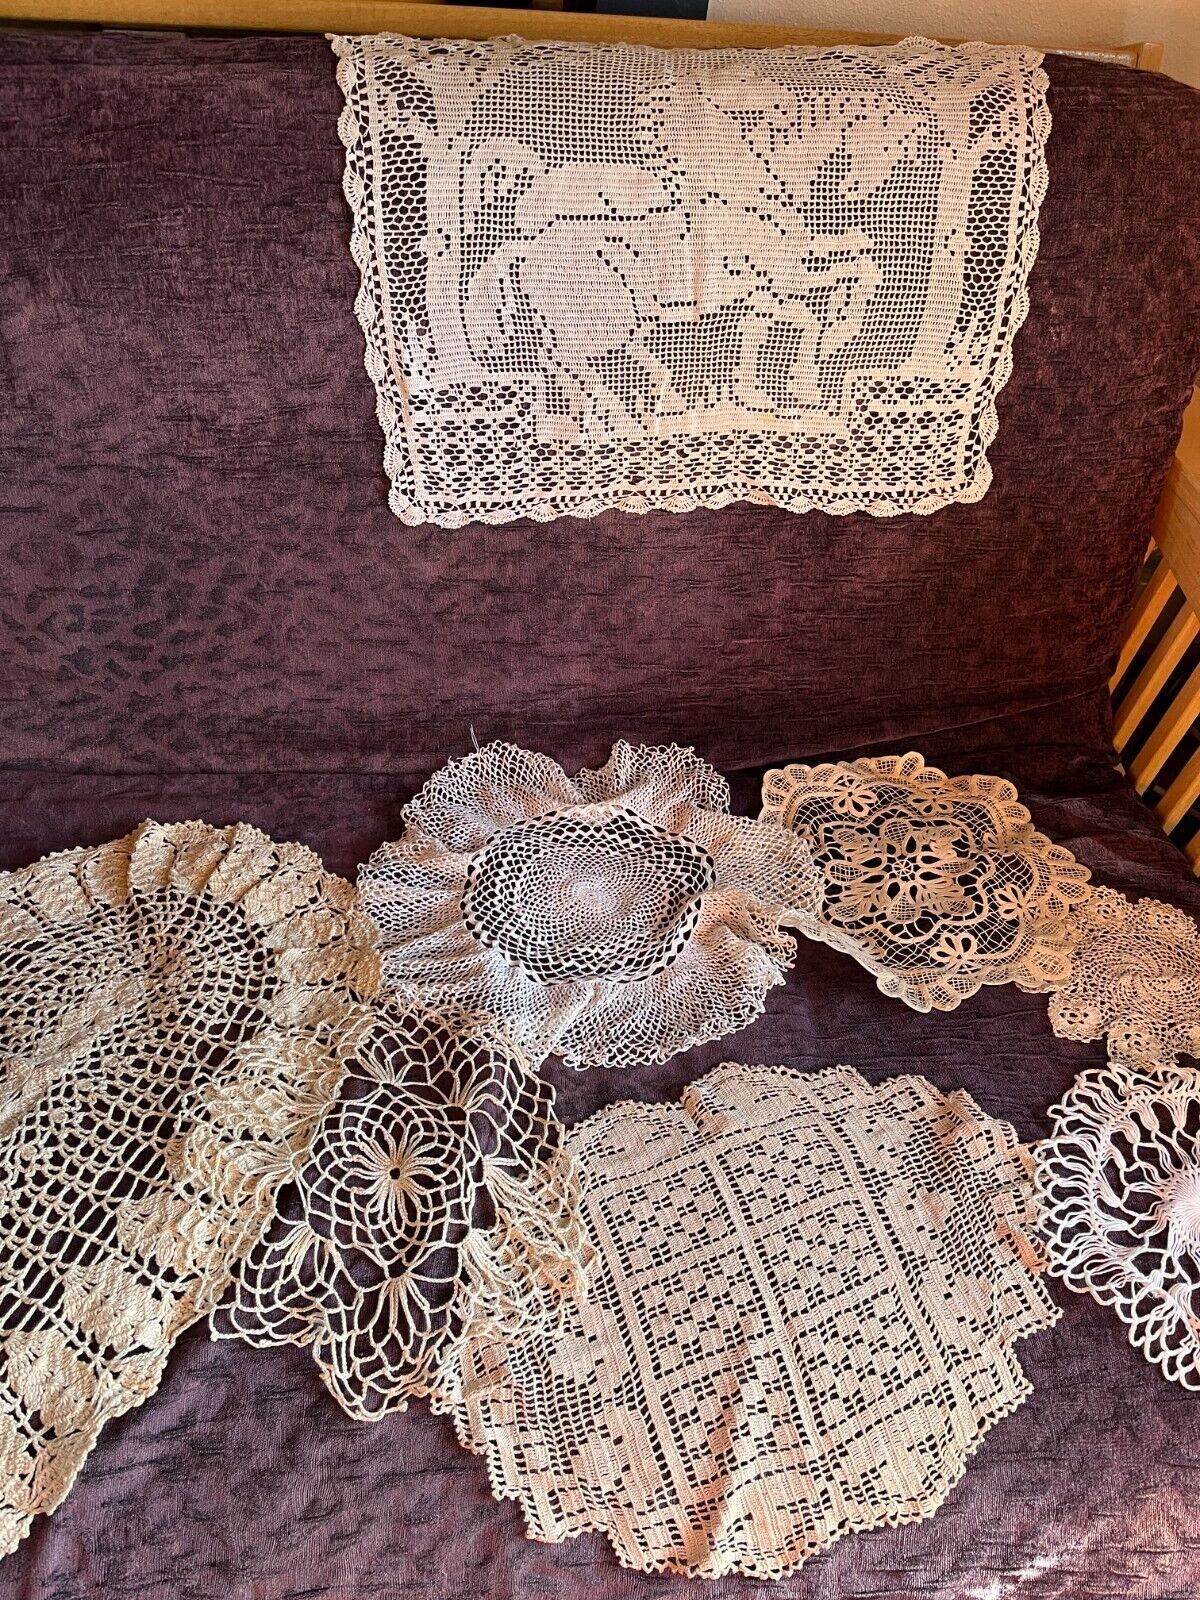 Primary image for Lot of Cream or Ecru Filet Crocheted Stately Horses Round & Oval Doilies Runners